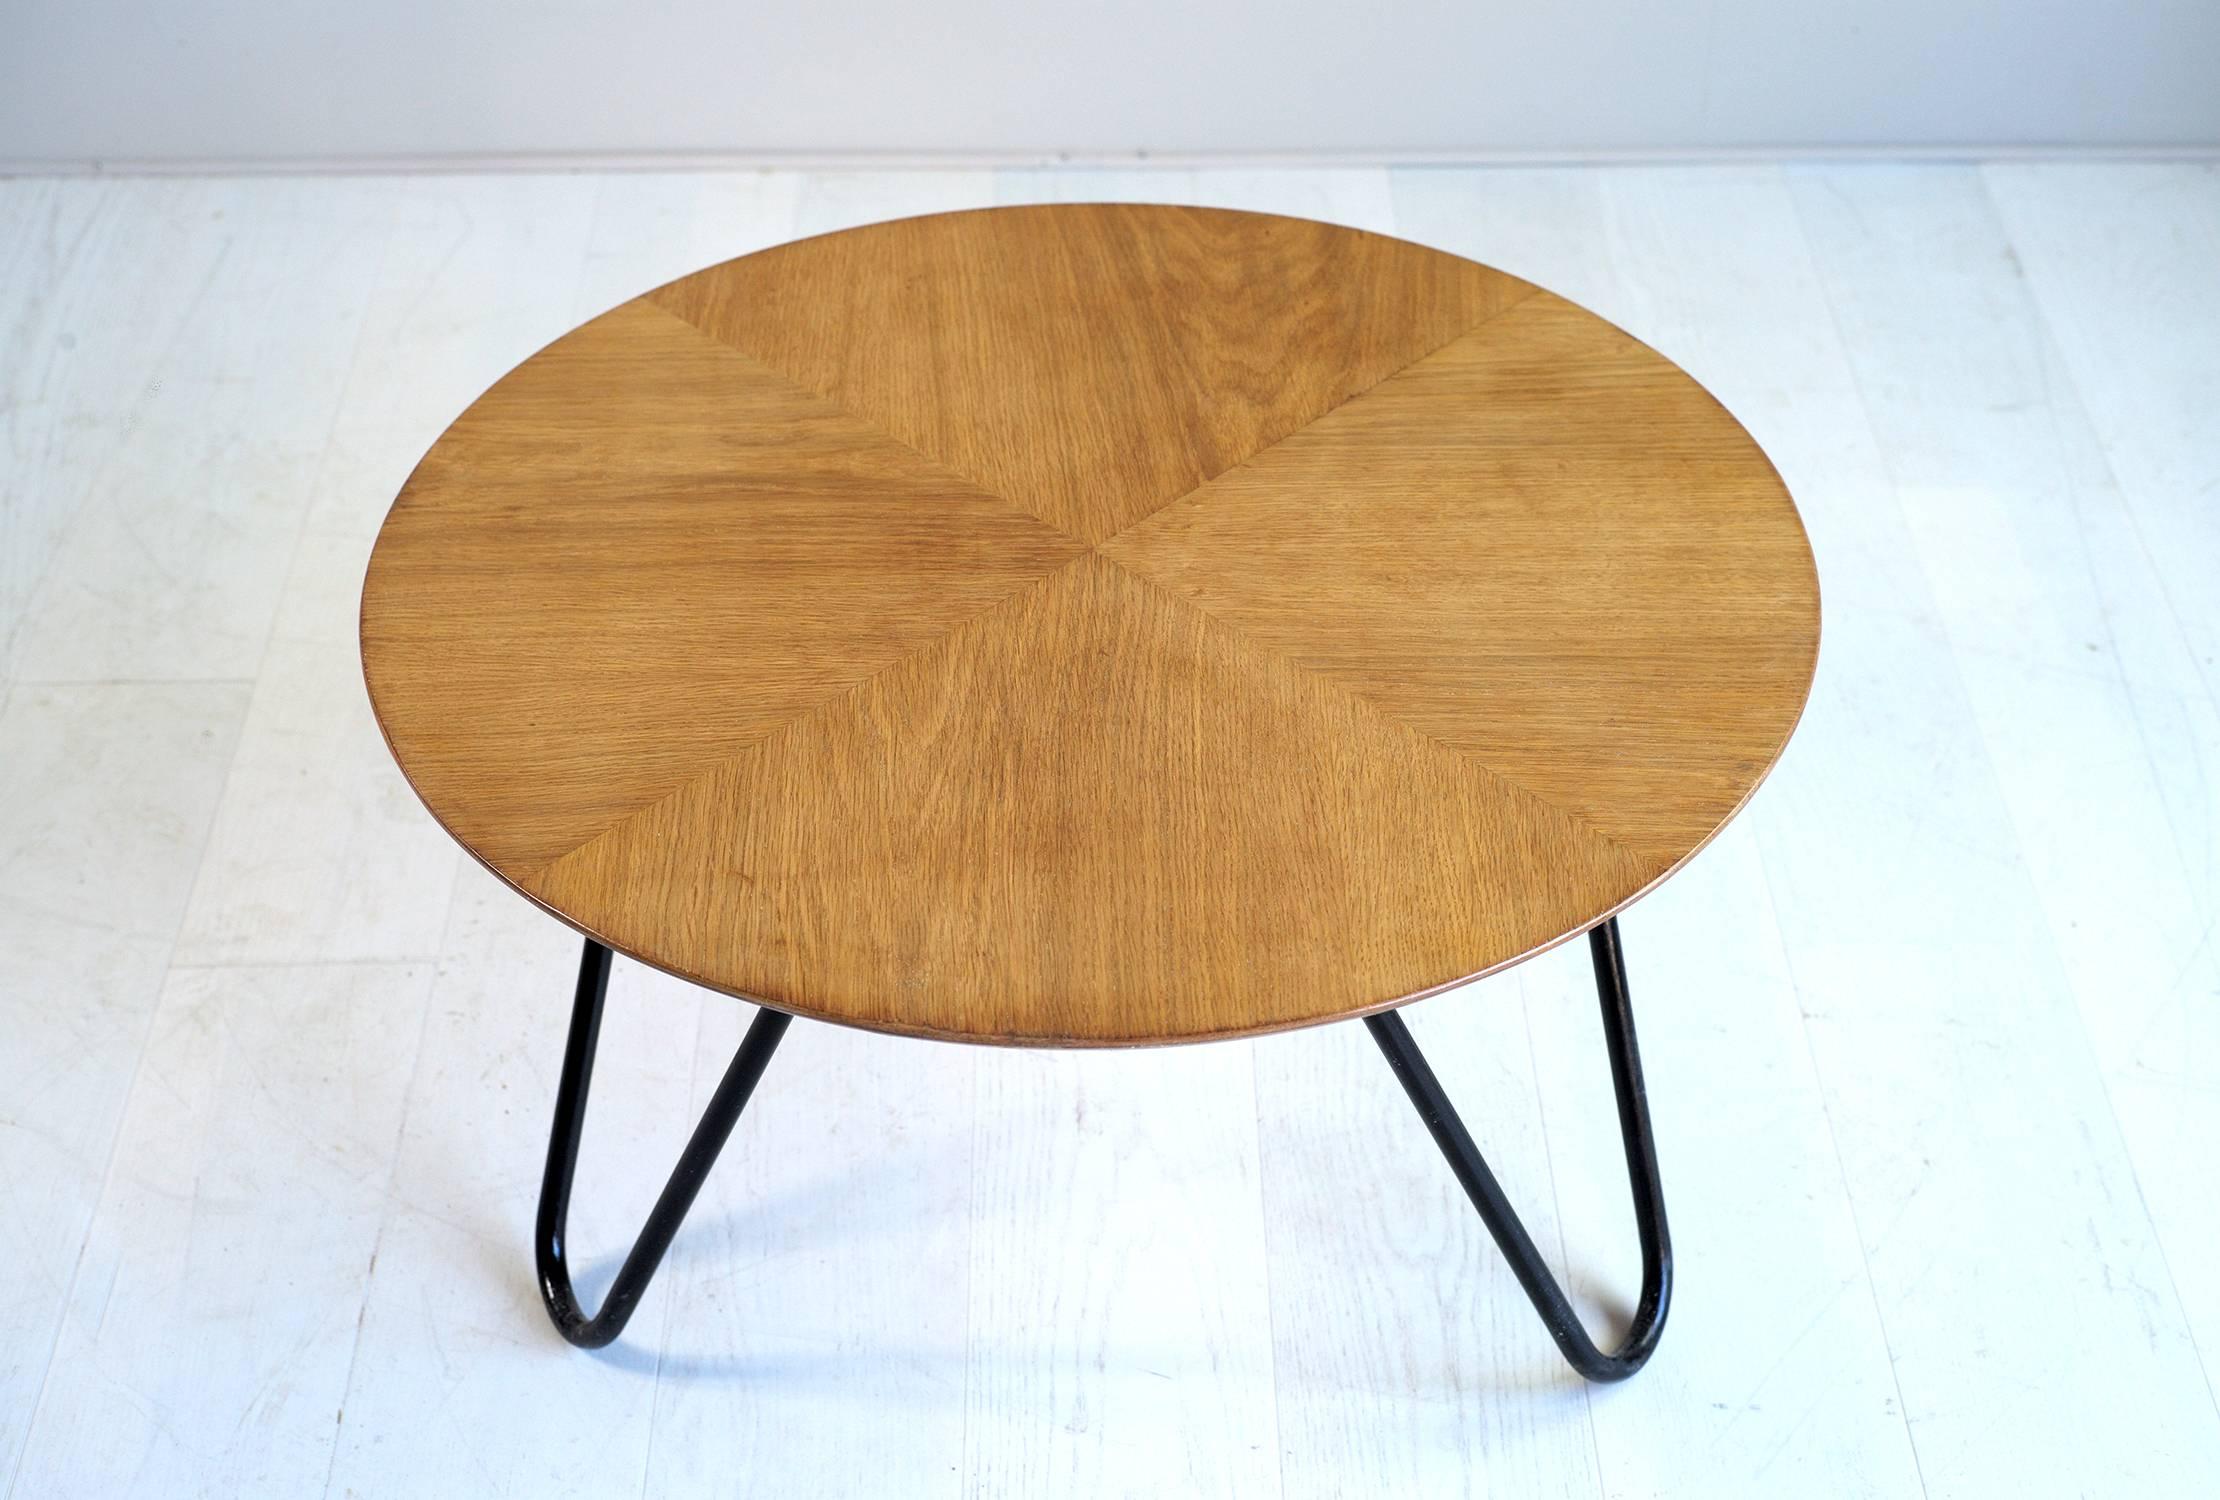 Jacques Hitier, round coffee table n ° 34, Tubauto edition, France, 1950. Top in oak veneer plywood, base in tubular black lacquered metal.
Bibliography: Jacques Hitier, industrial modernity, P 44-45, 59
Major actor of the French Reconstruction,